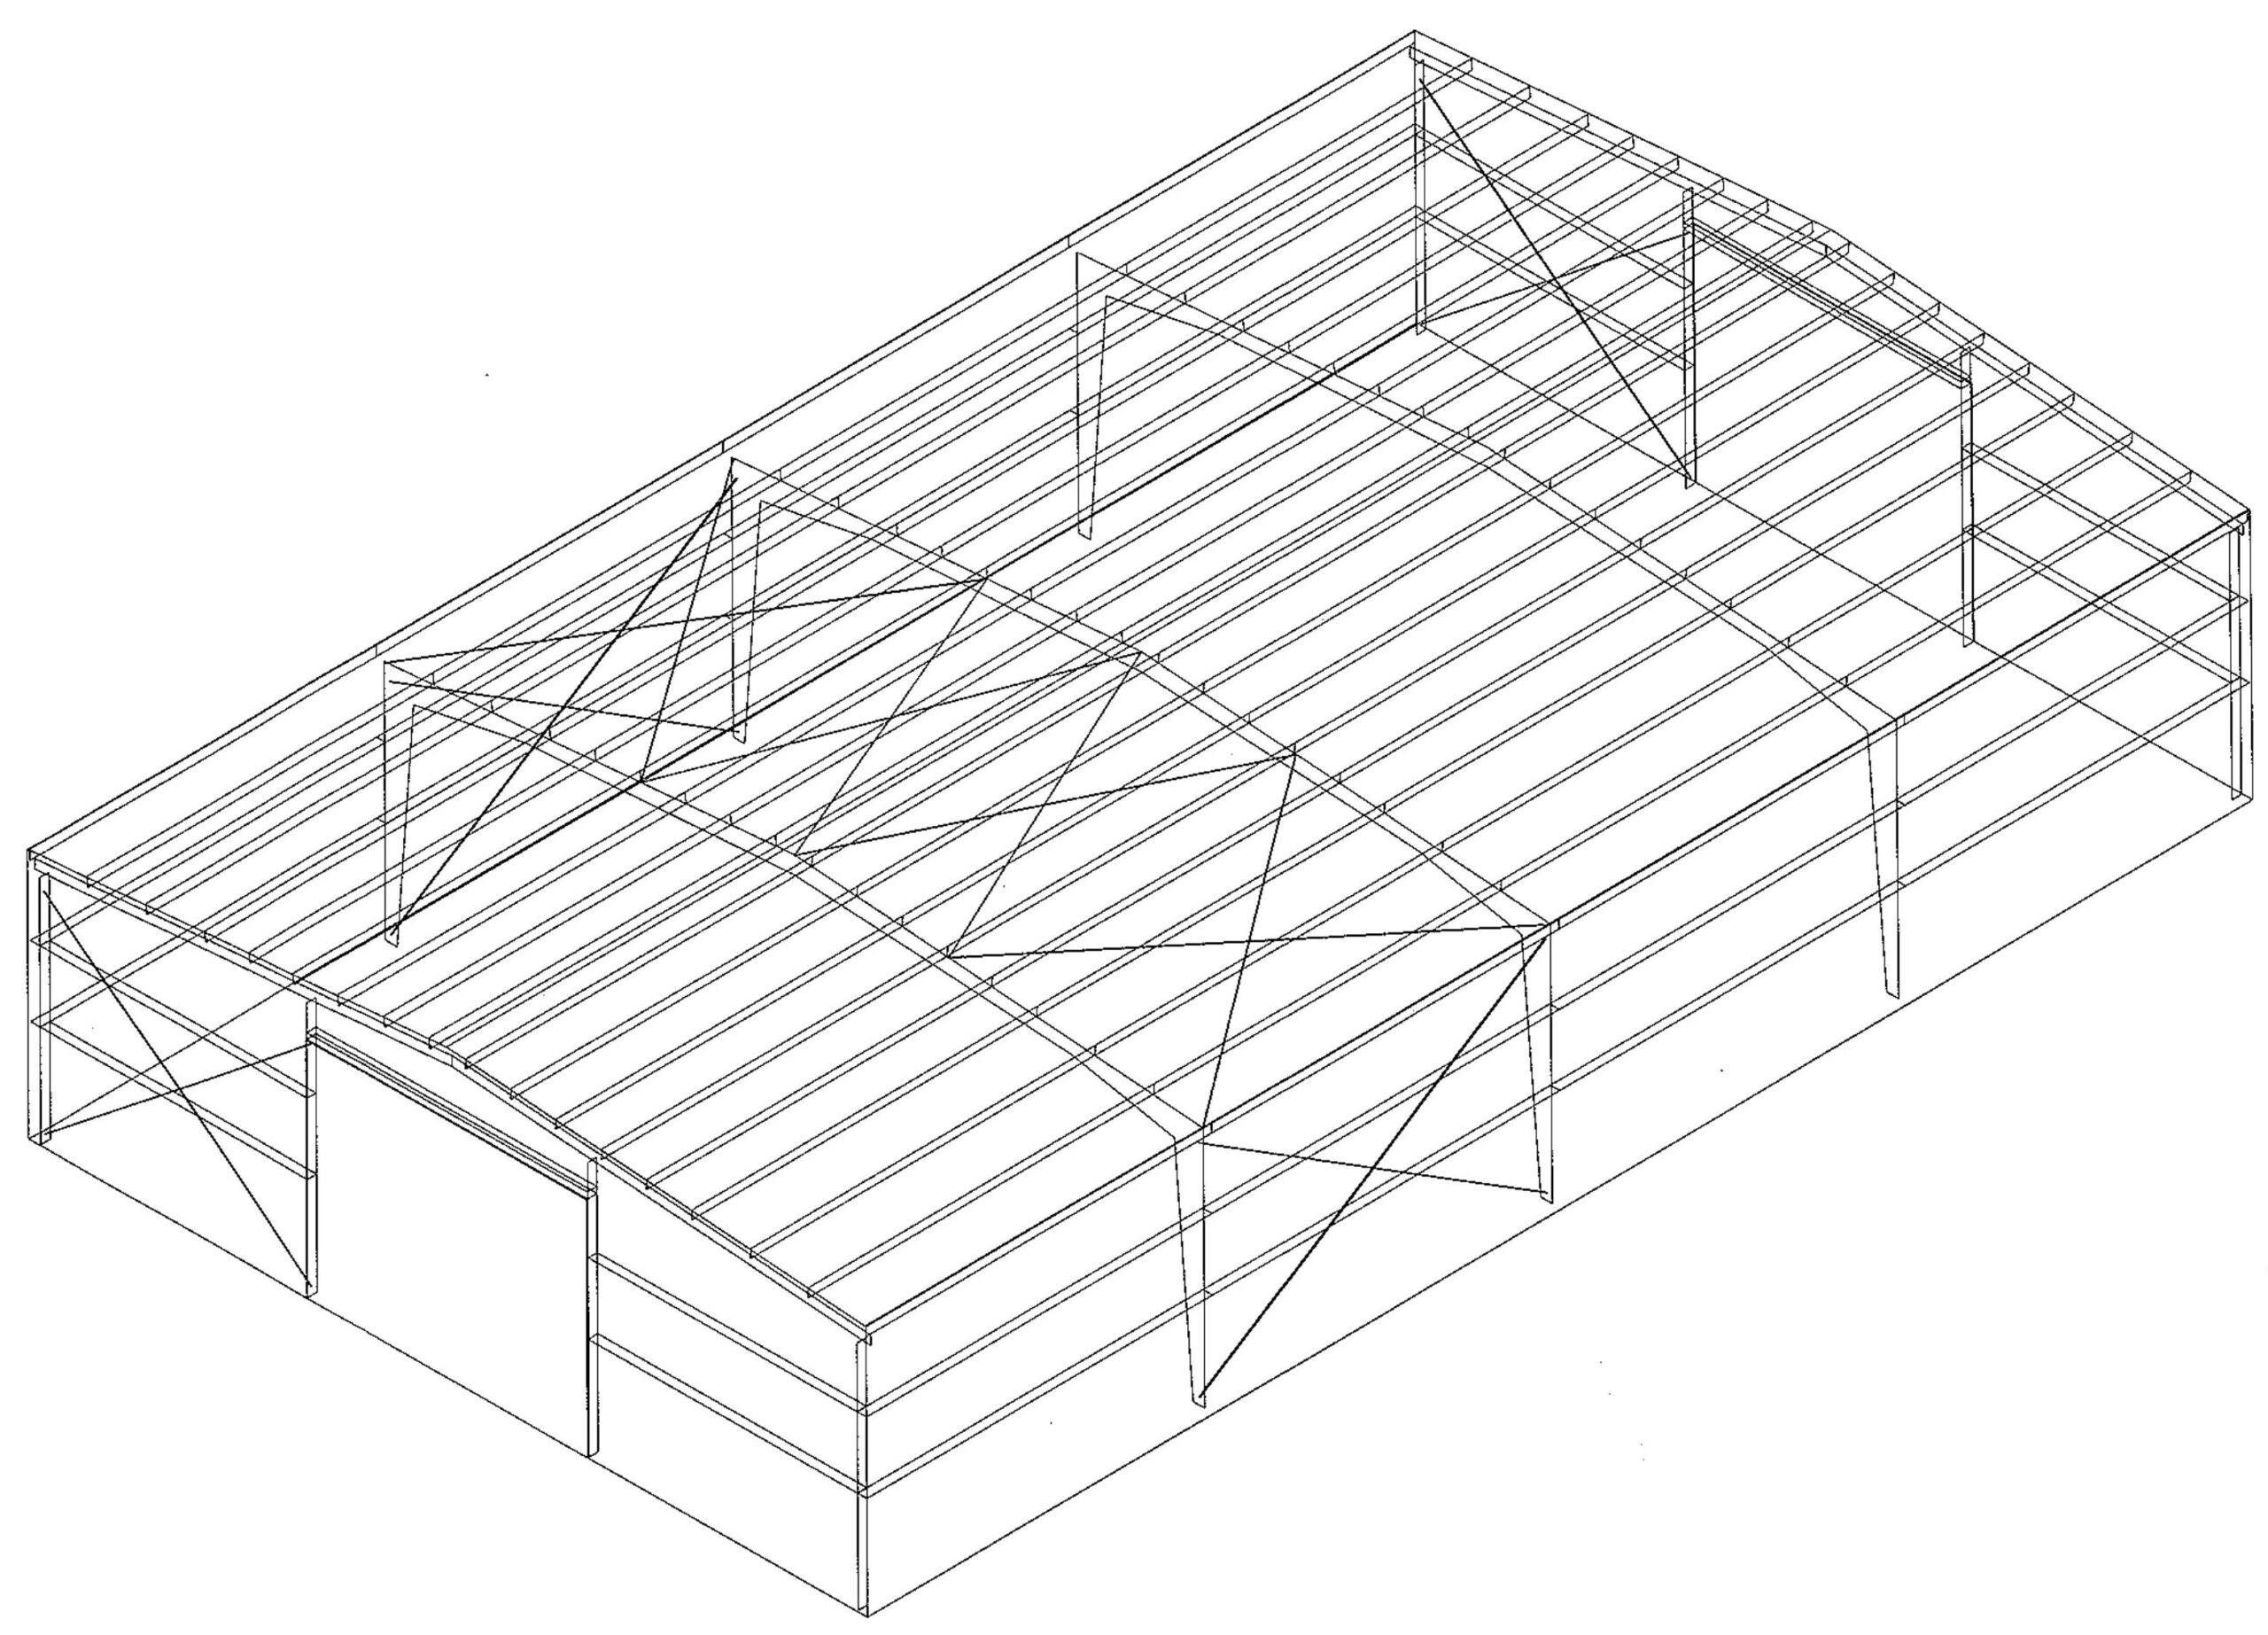 Diagram of building structure, current special